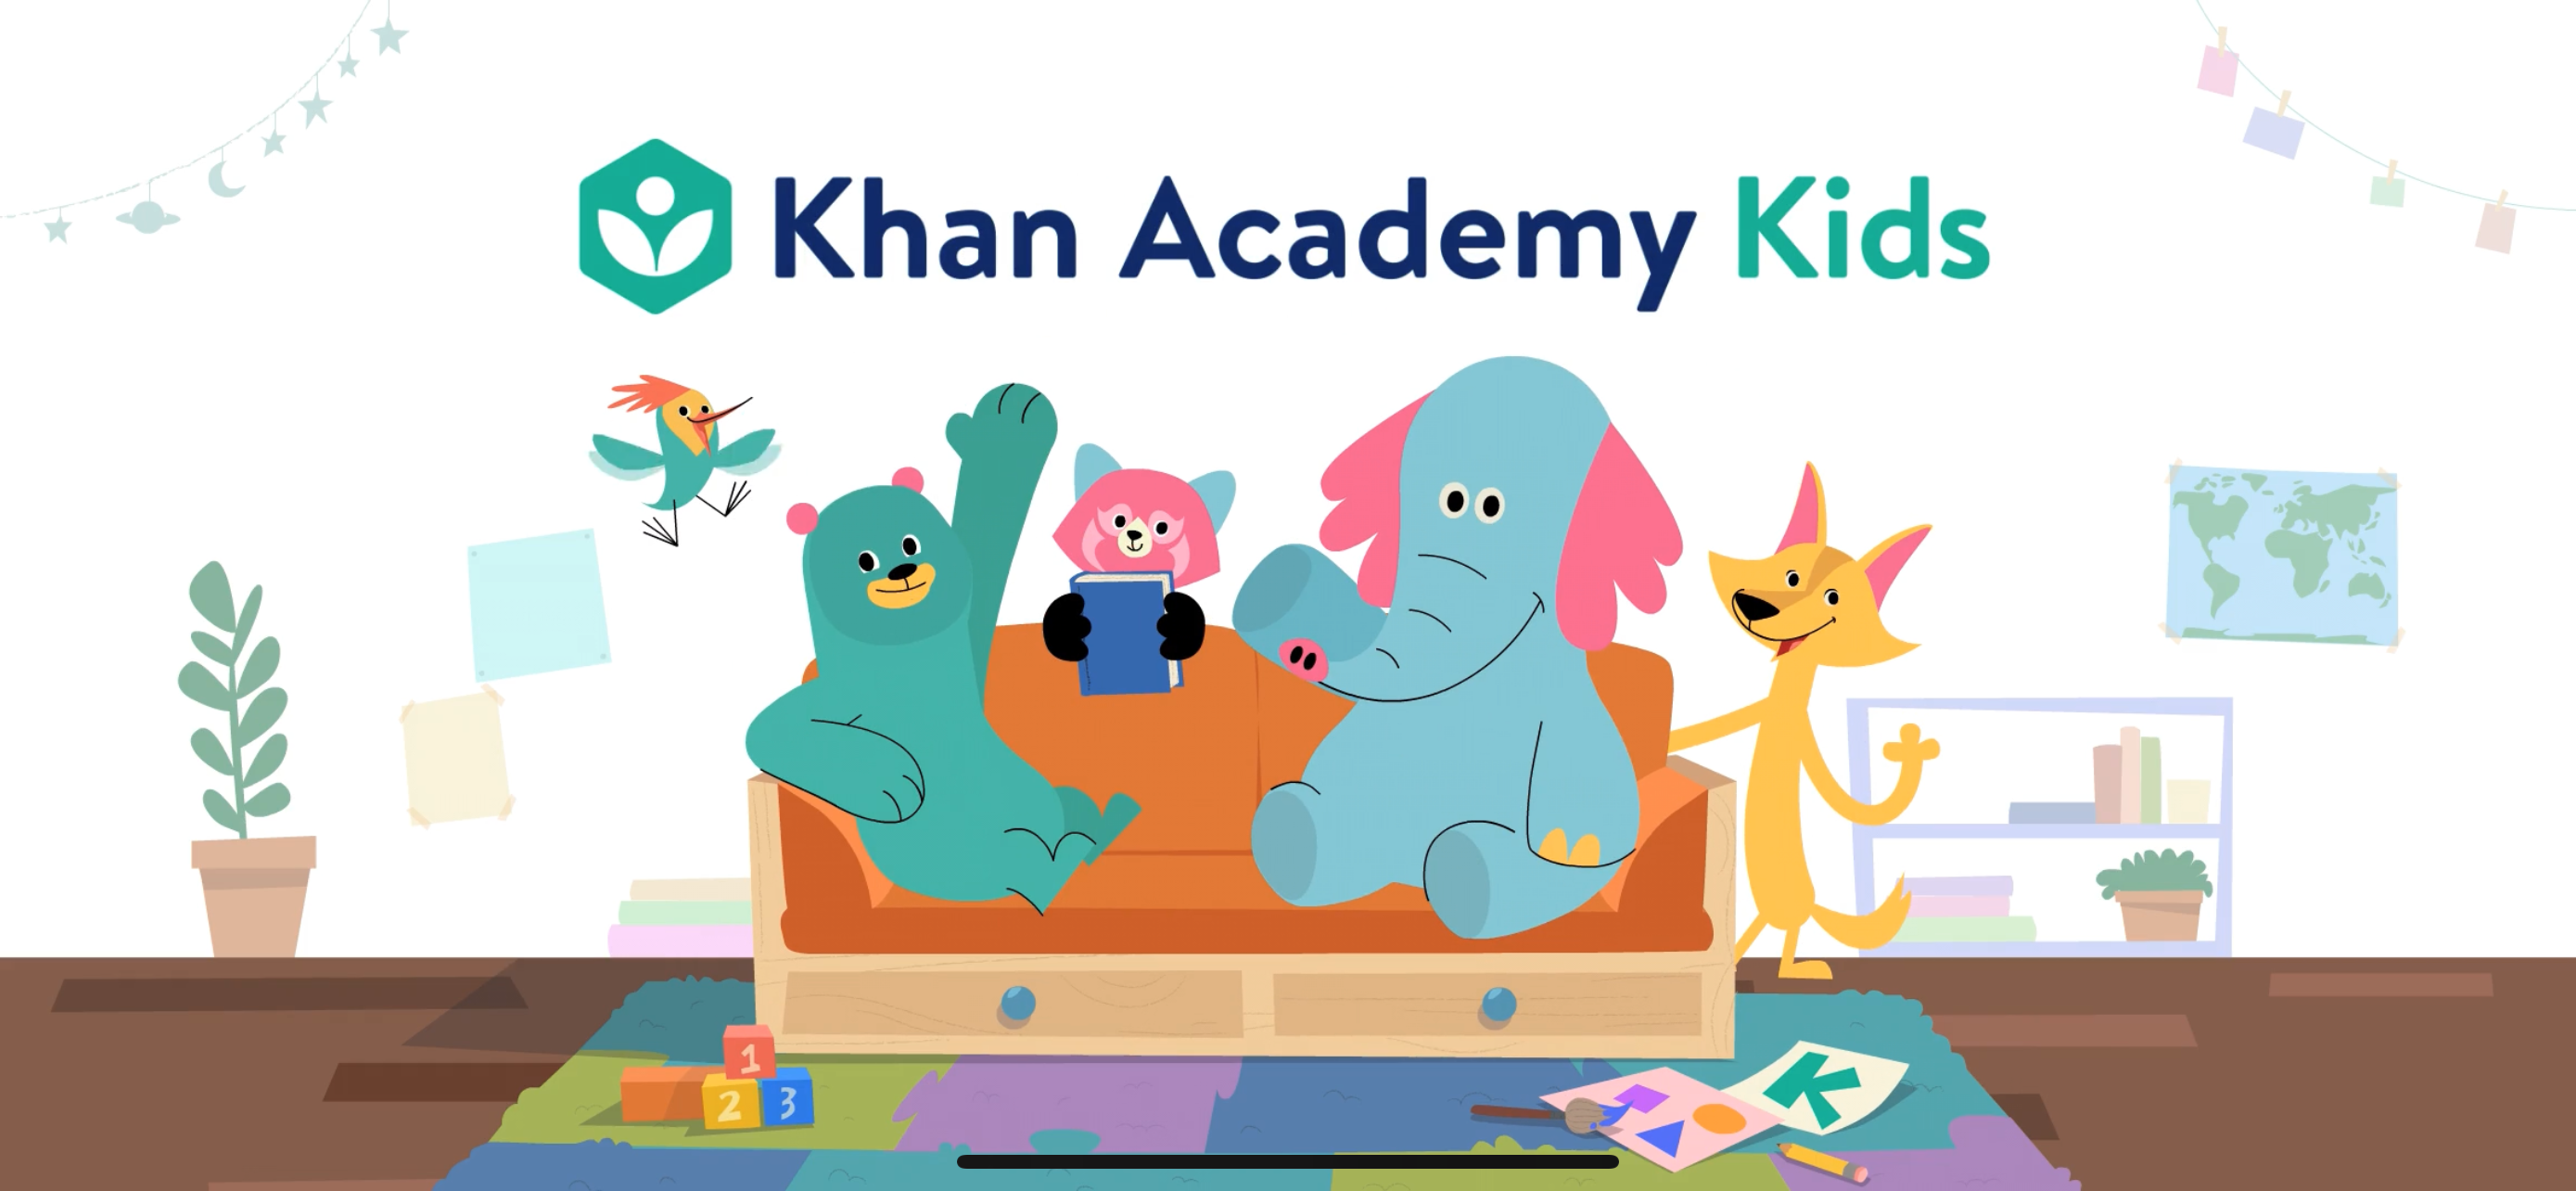 Khan Academy Kids Graphic with animal characters